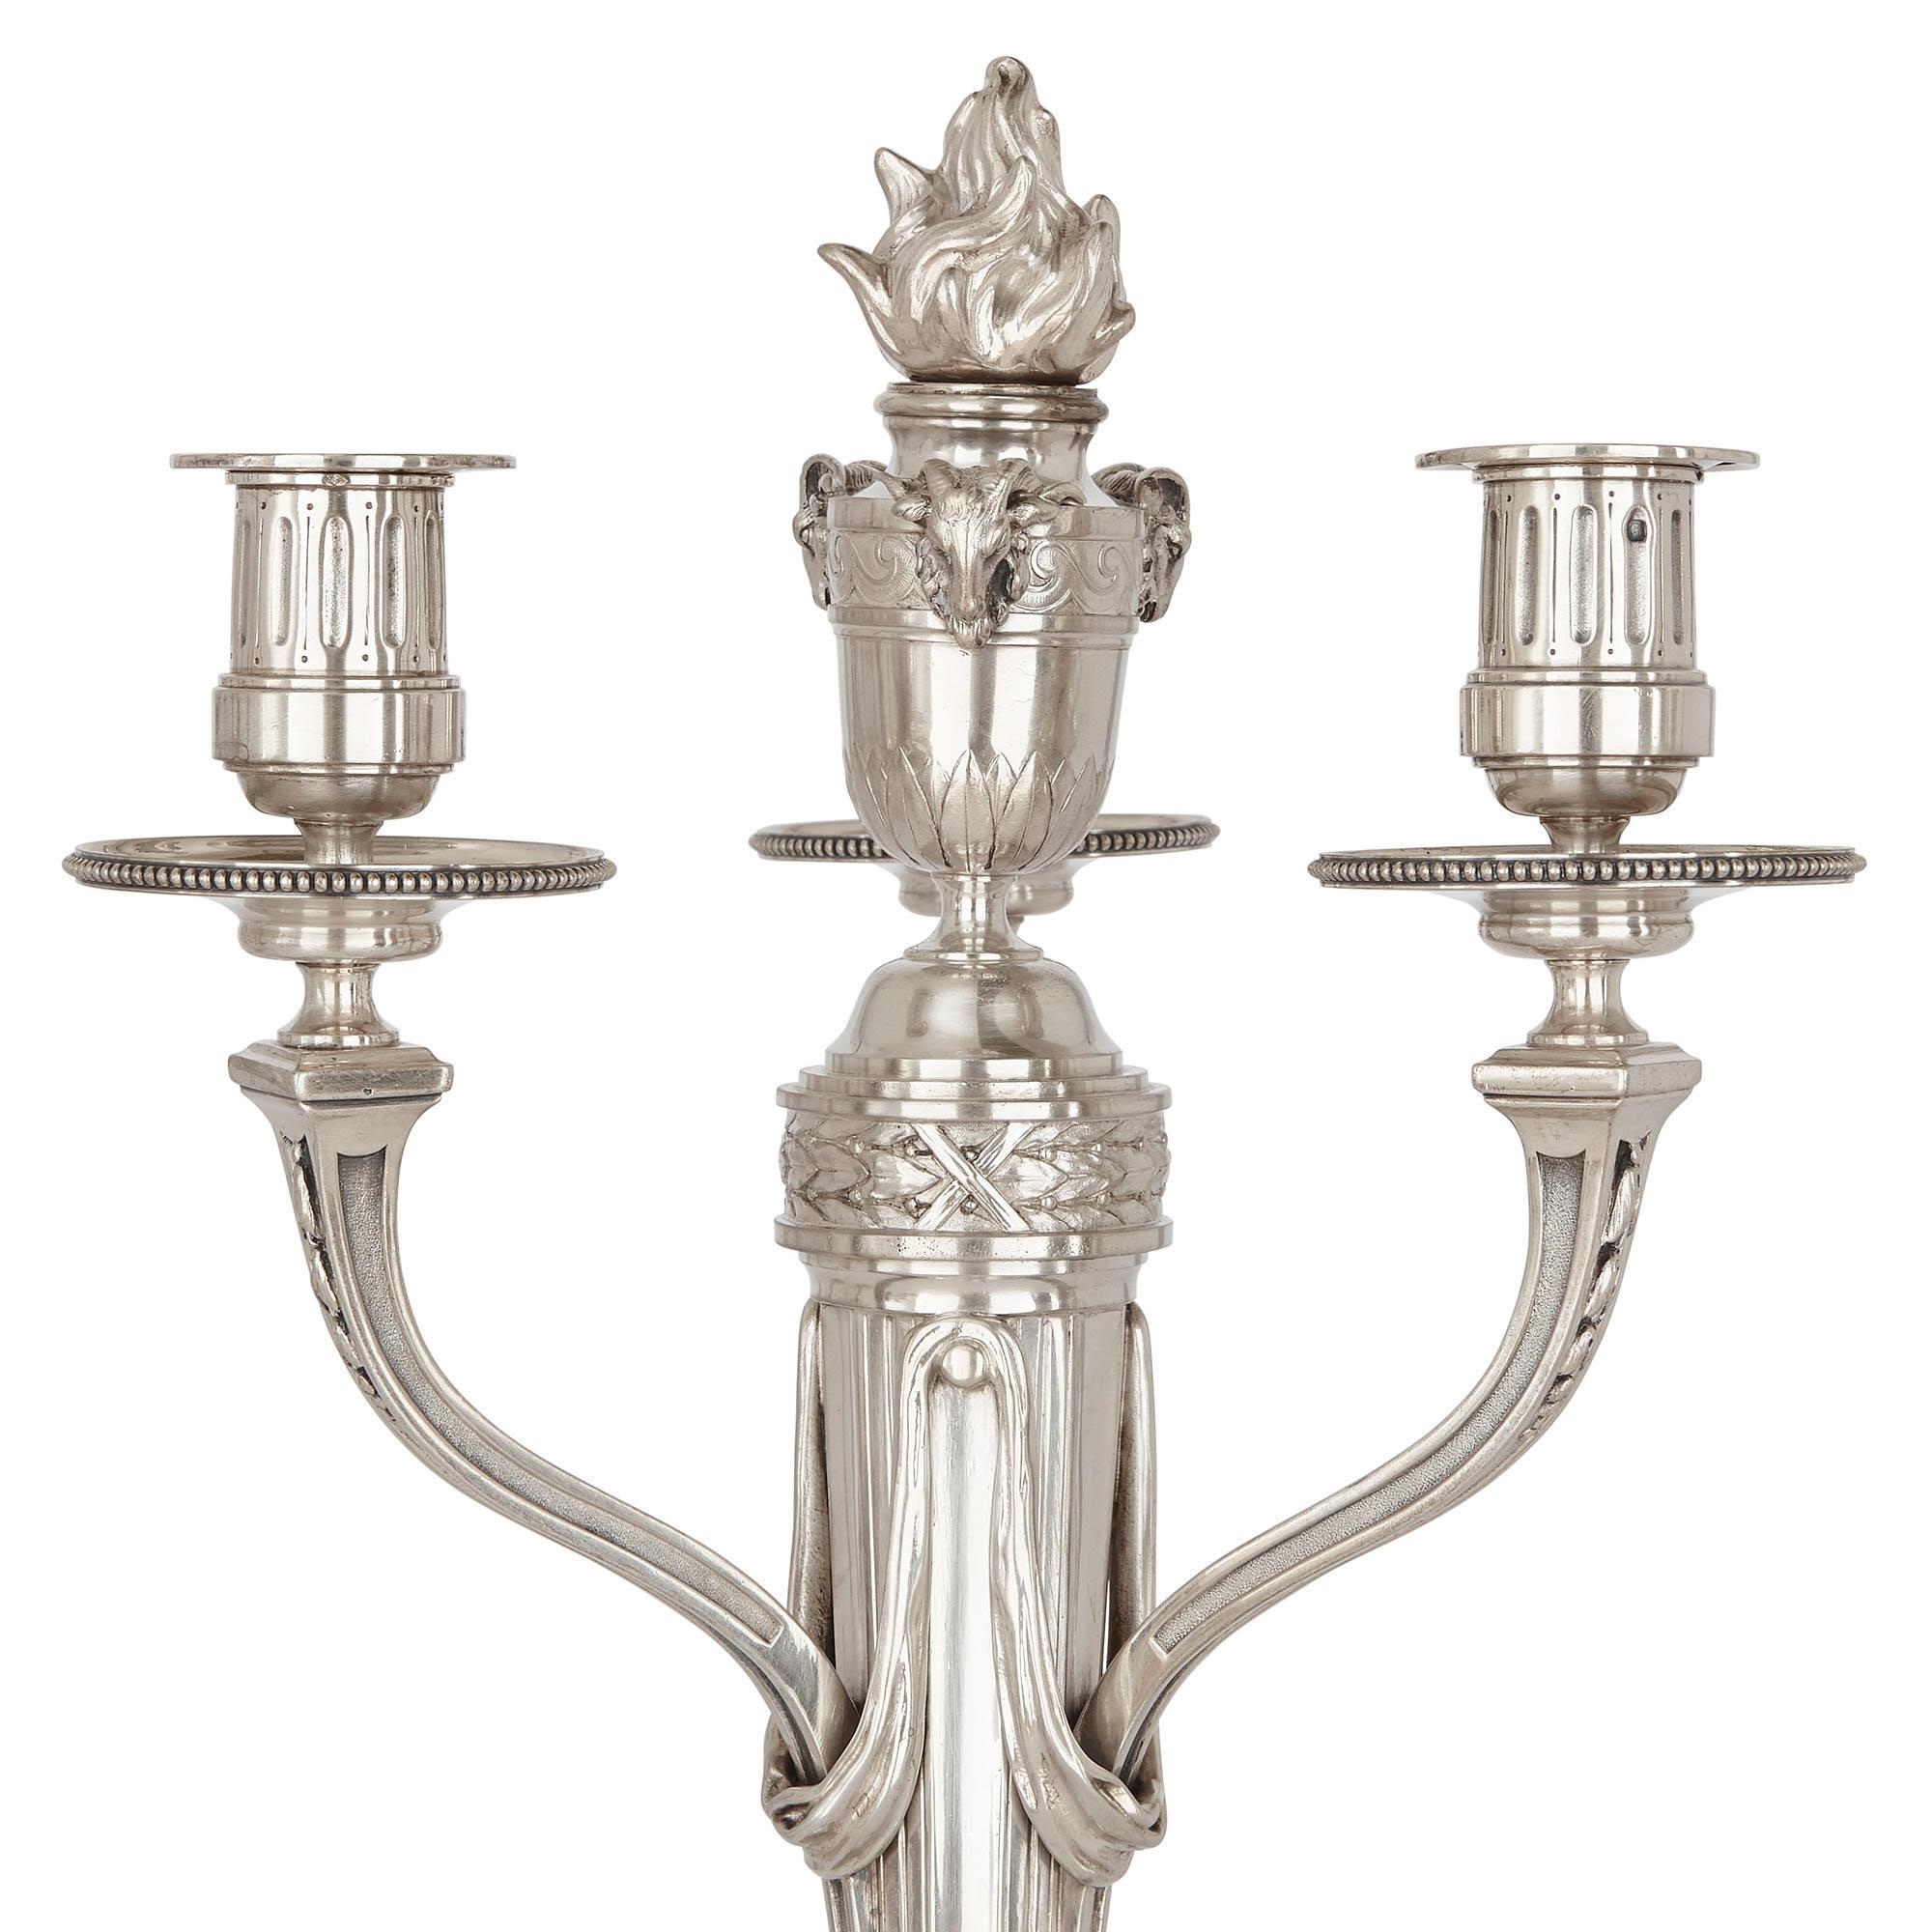 This beautiful set of four candelabra (or candlesticks) was made around 1900 by André Aucoc, a leading French silversmith of the time. Aucoc inherited the family jewellery business, La Maison Aucoc, in Paris from his elder brother, Louis. When he